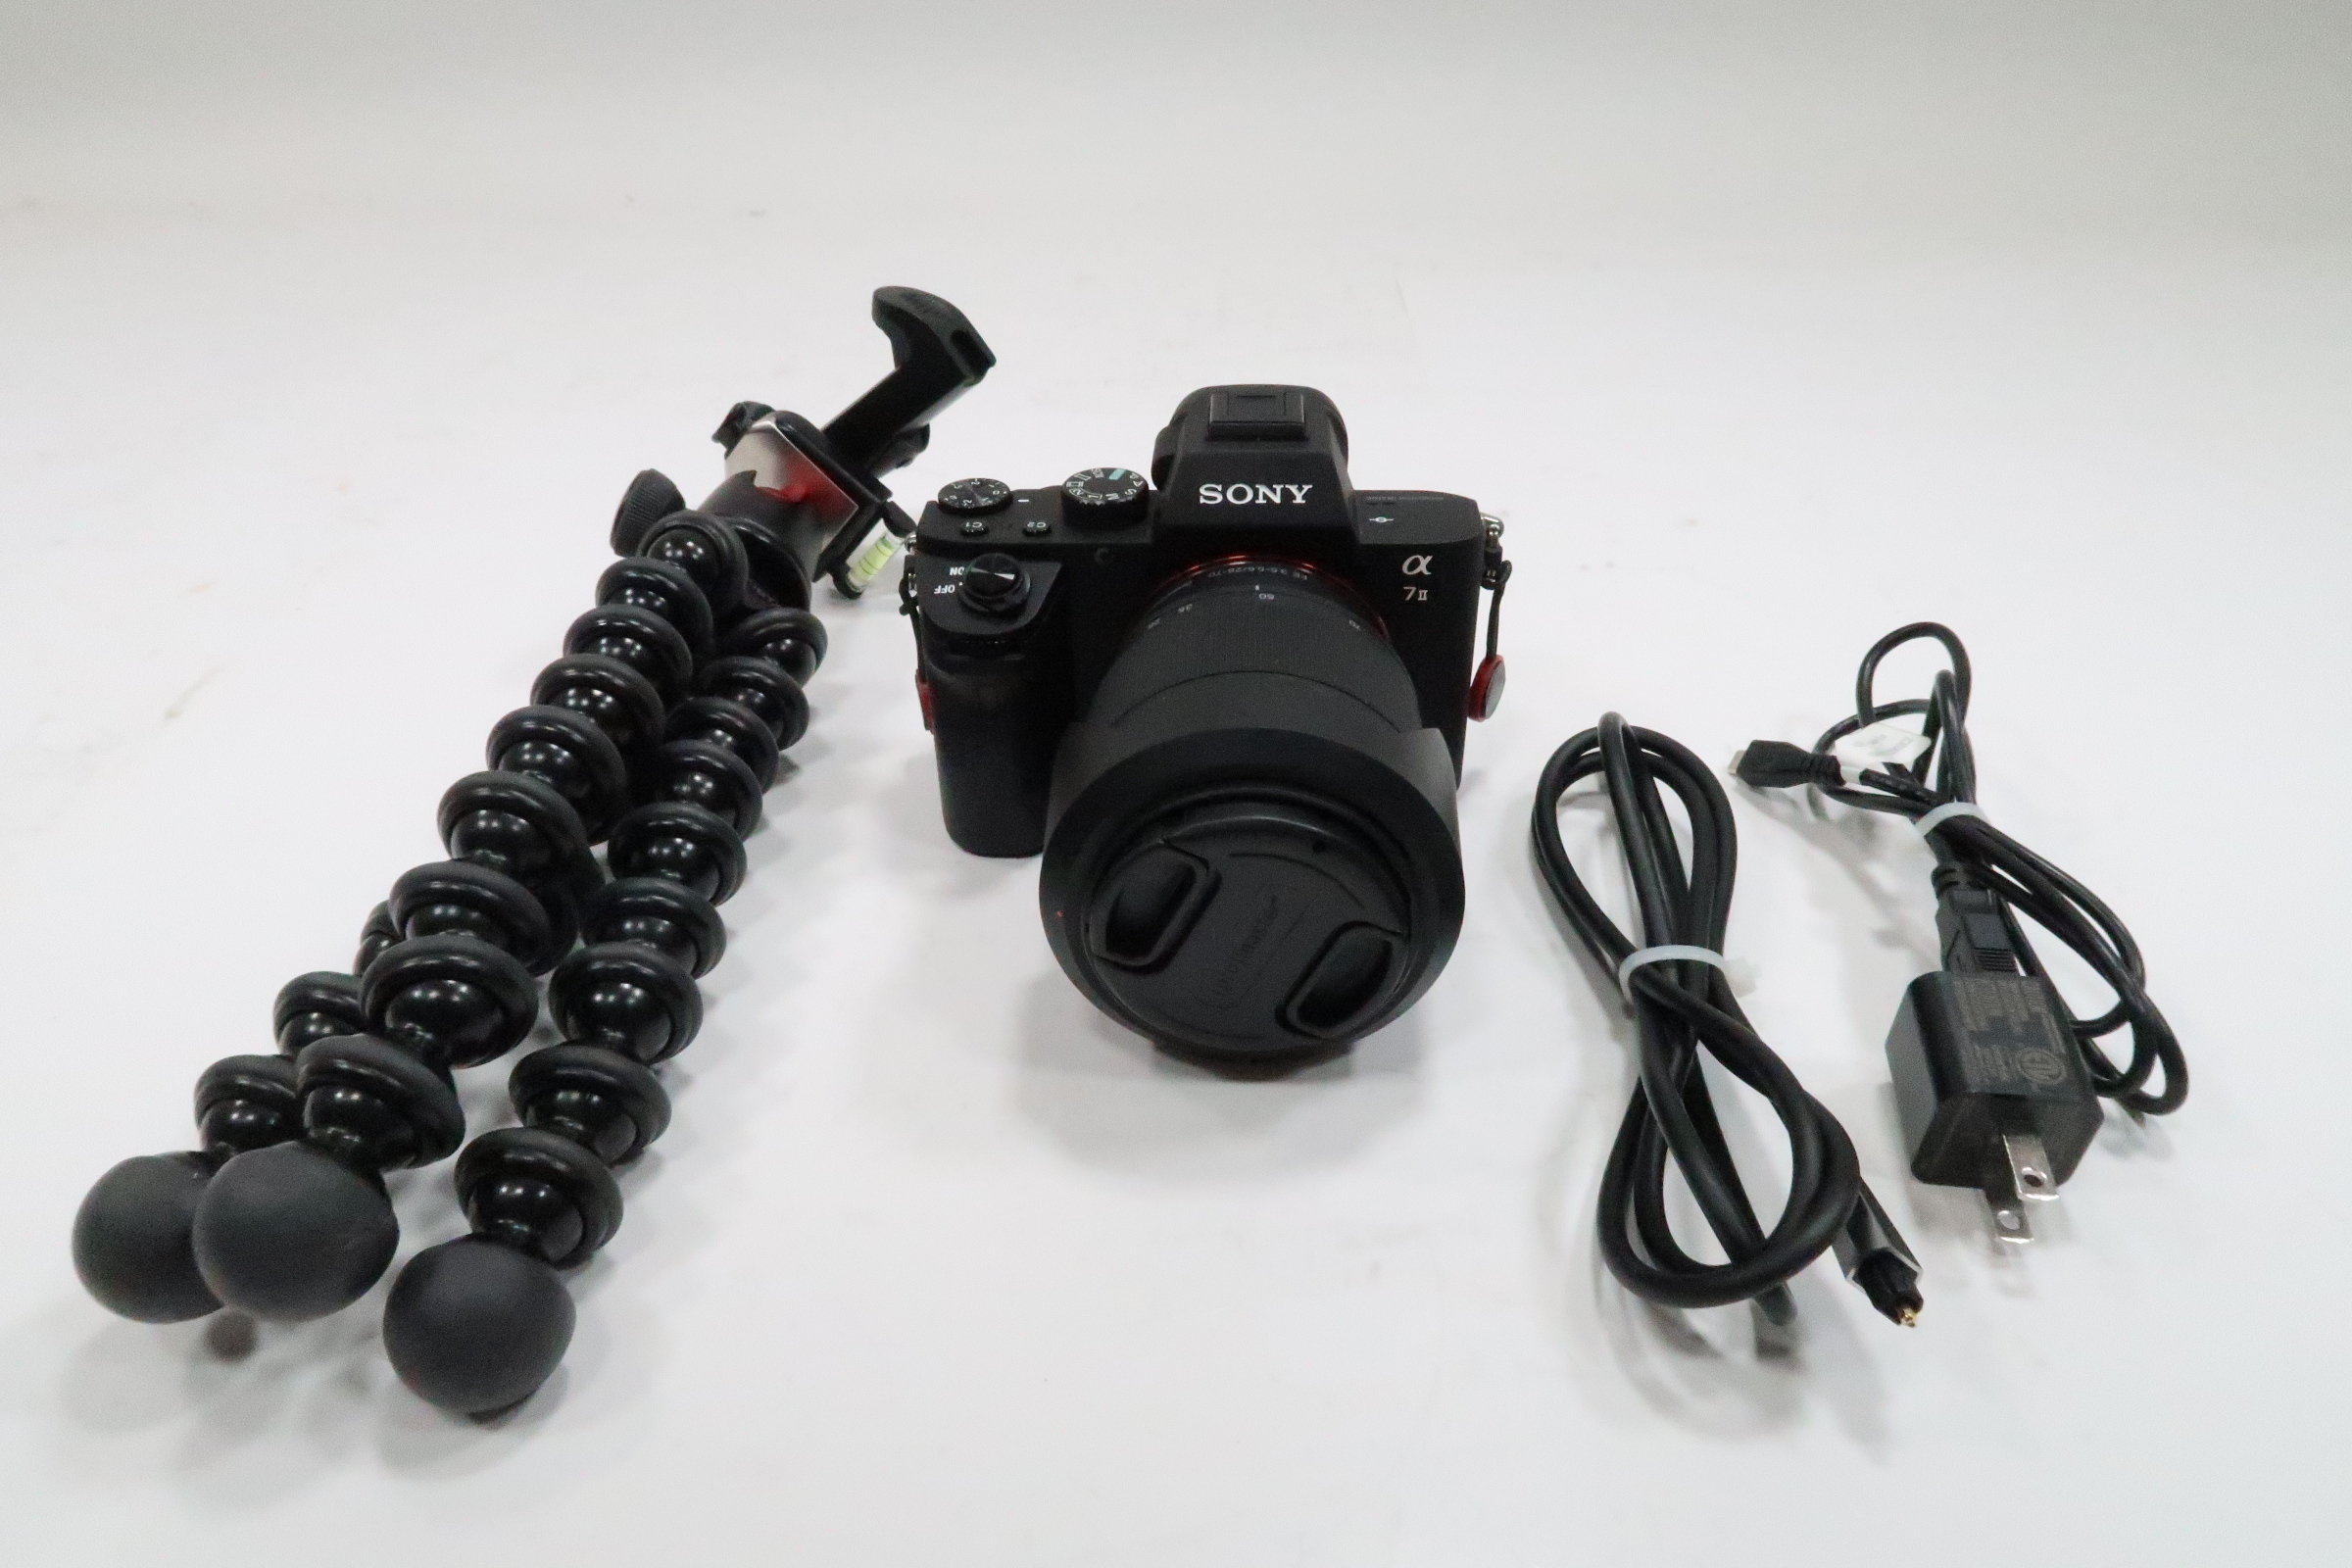 Sony a7 II Mirrorless Camera with 28-70mm Lens and Accessories Kit